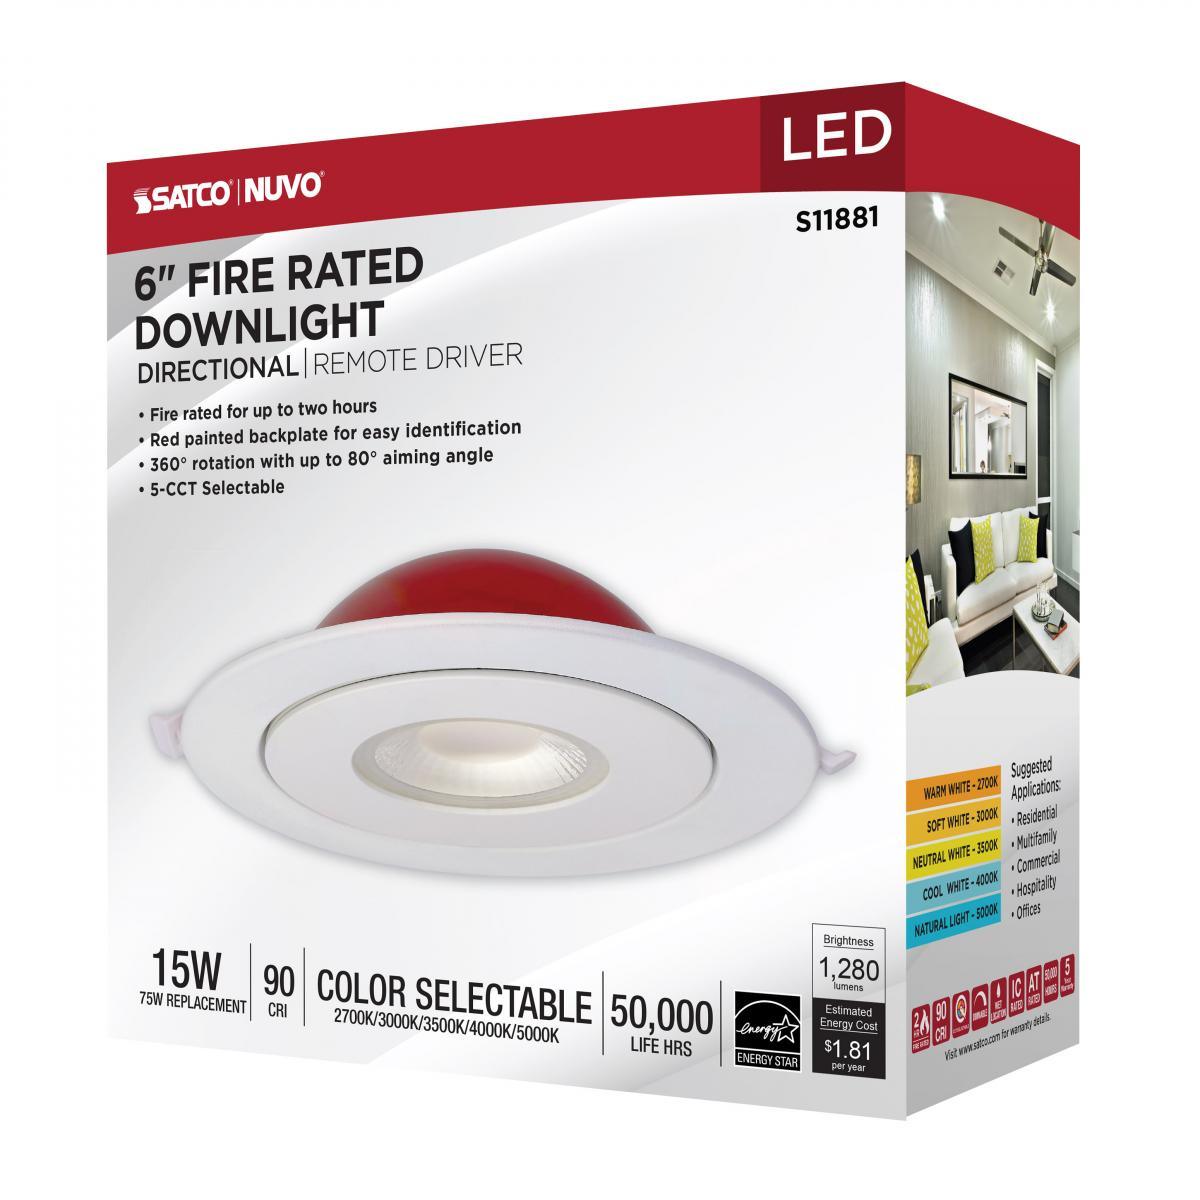 6 Inch Round LED Fire Rated Directional Downlight, 15 Watt, 1280 Lumens, Selectable CCT 2700K to 5000K, Adjustable Trim